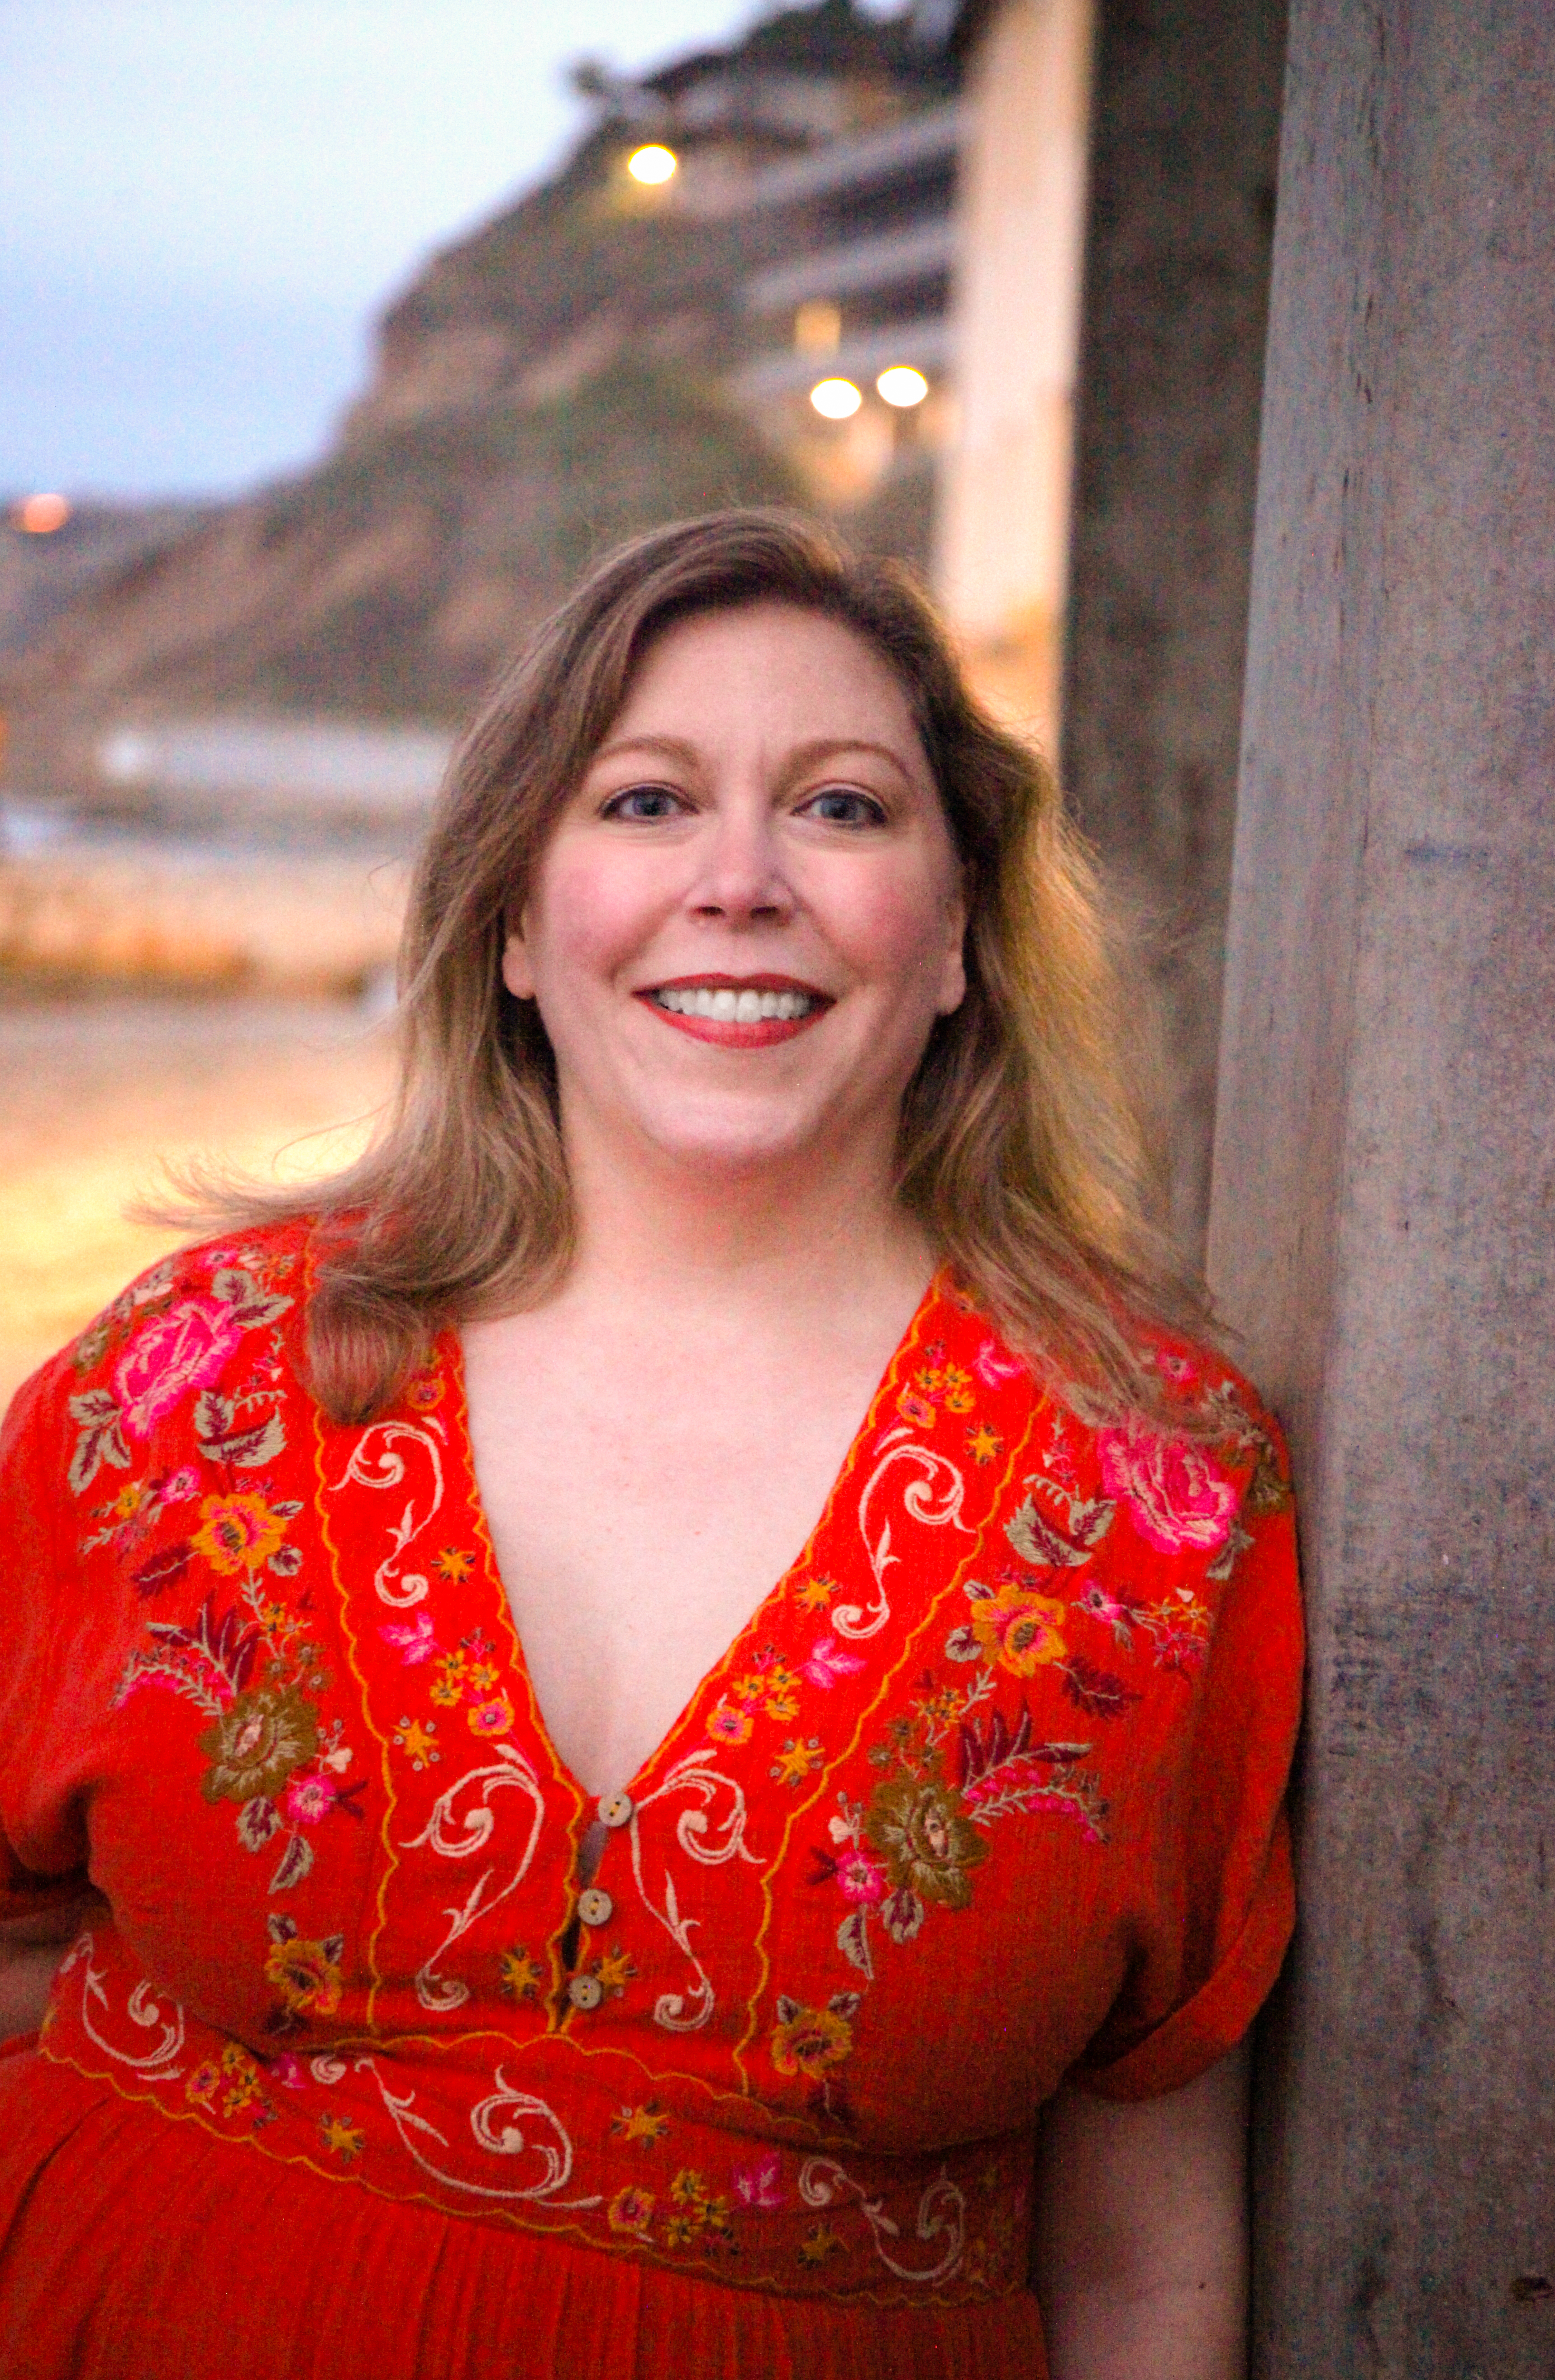 Smiling woman in an orange dress leaning against a pier at dusk.